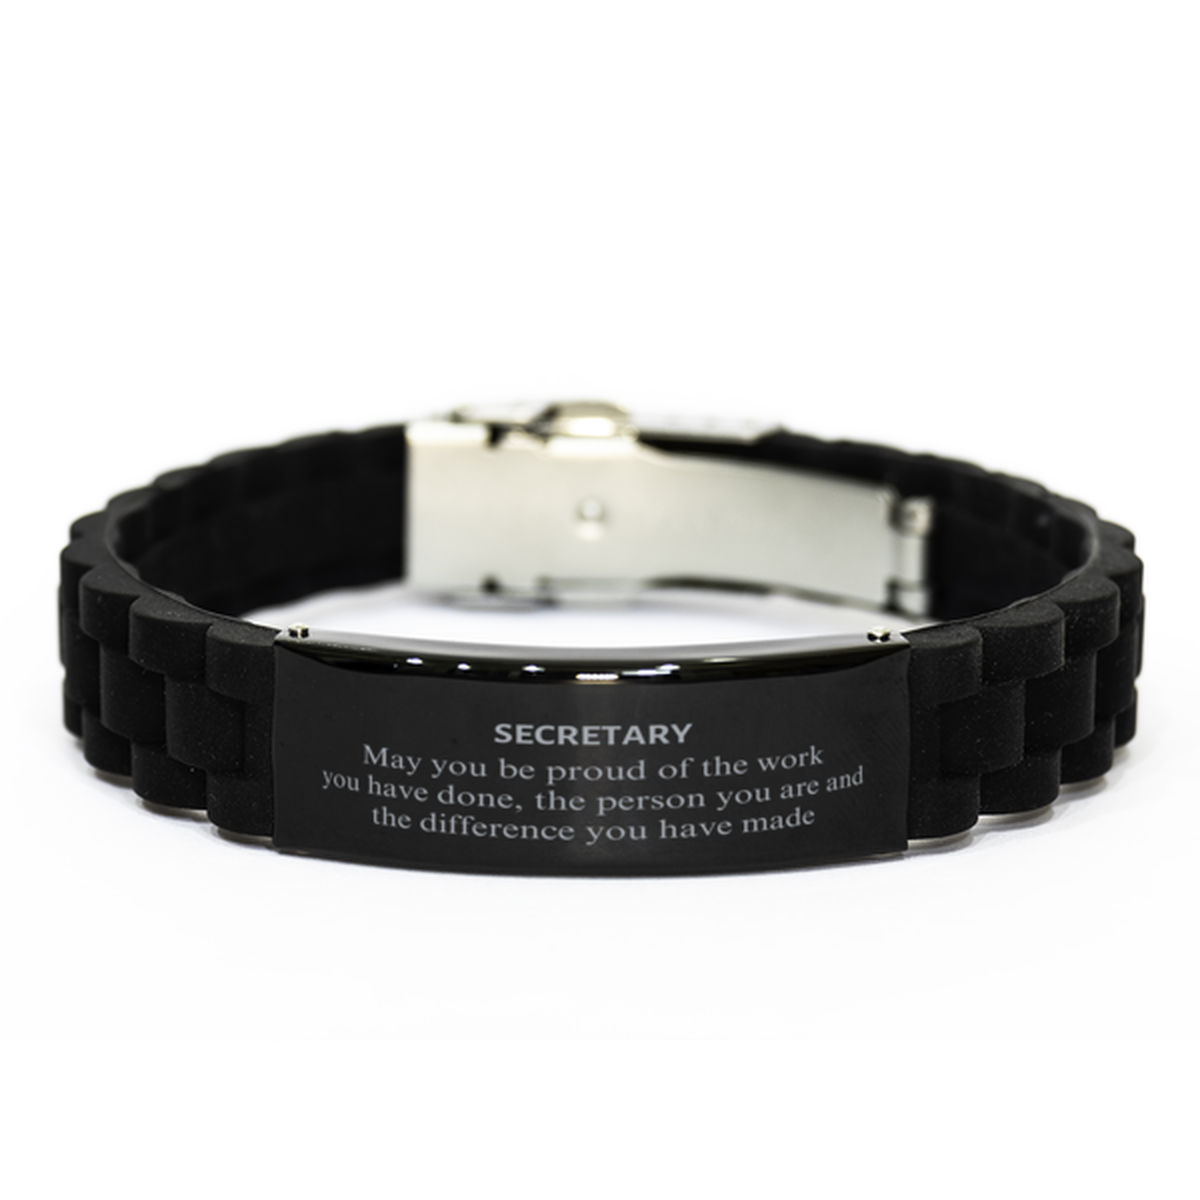 Secretary May you be proud of the work you have done, Retirement Secretary Black Glidelock Clasp Bracelet for Colleague Appreciation Gifts Amazing for Secretary